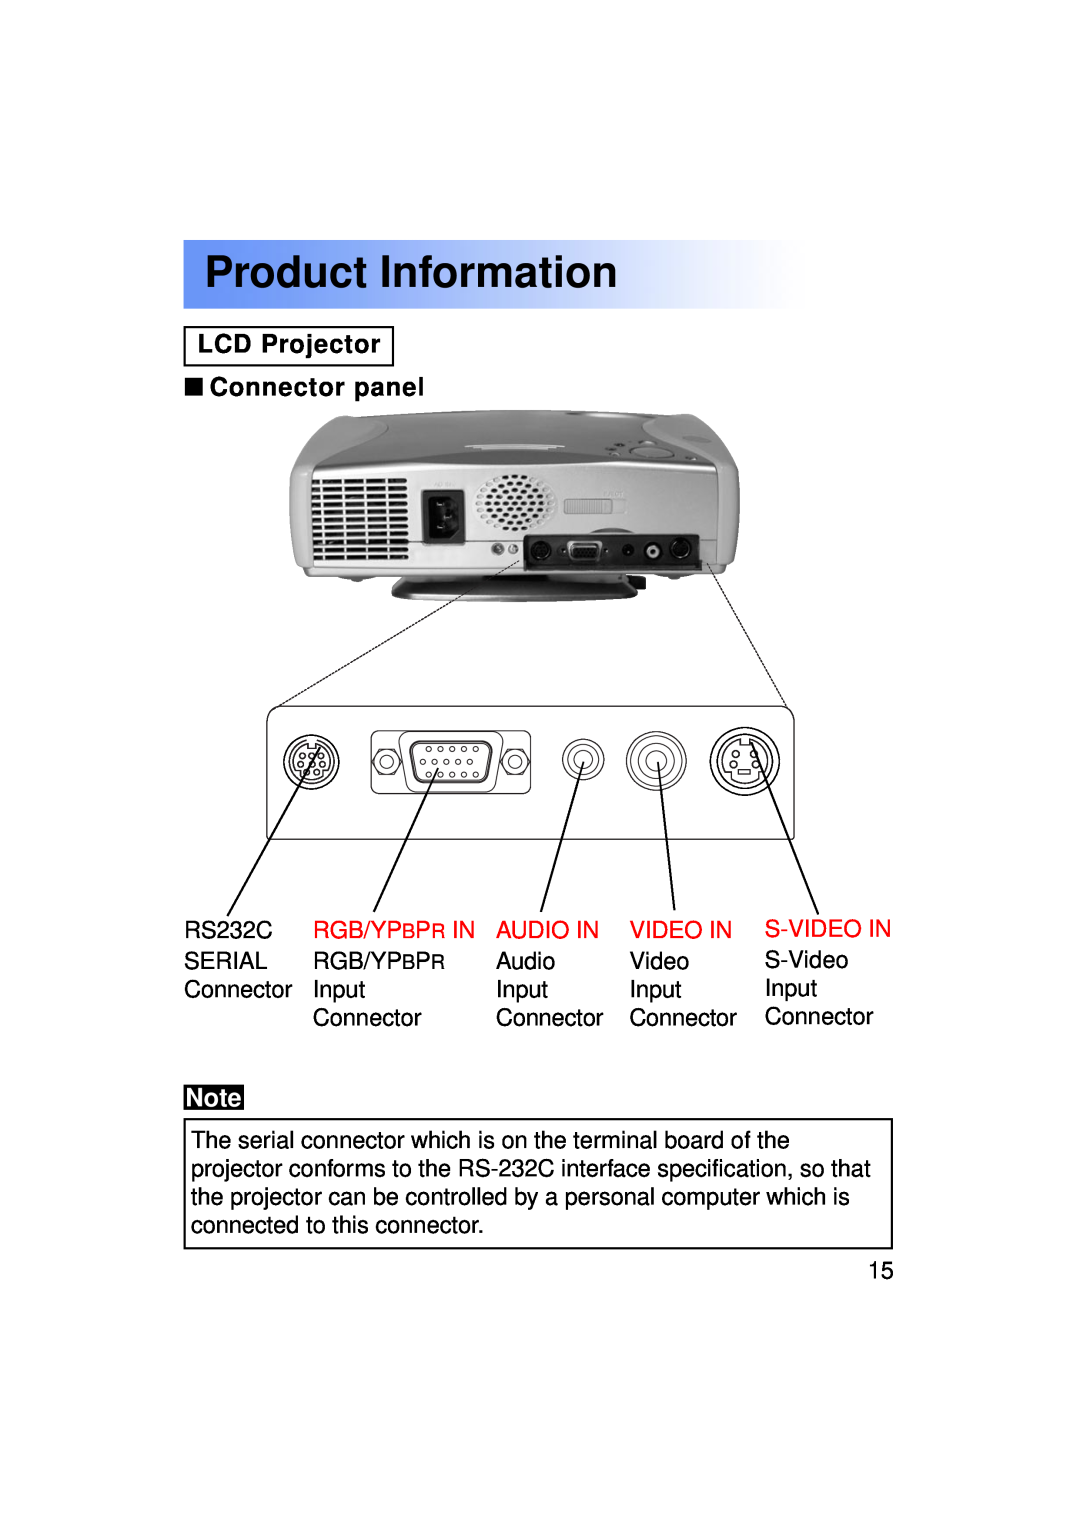 Panasonic PT-LC50U manual Product Information, LCD Projector Connector panel, Rgb/Ypbpr In, Audio In, S-Video In 